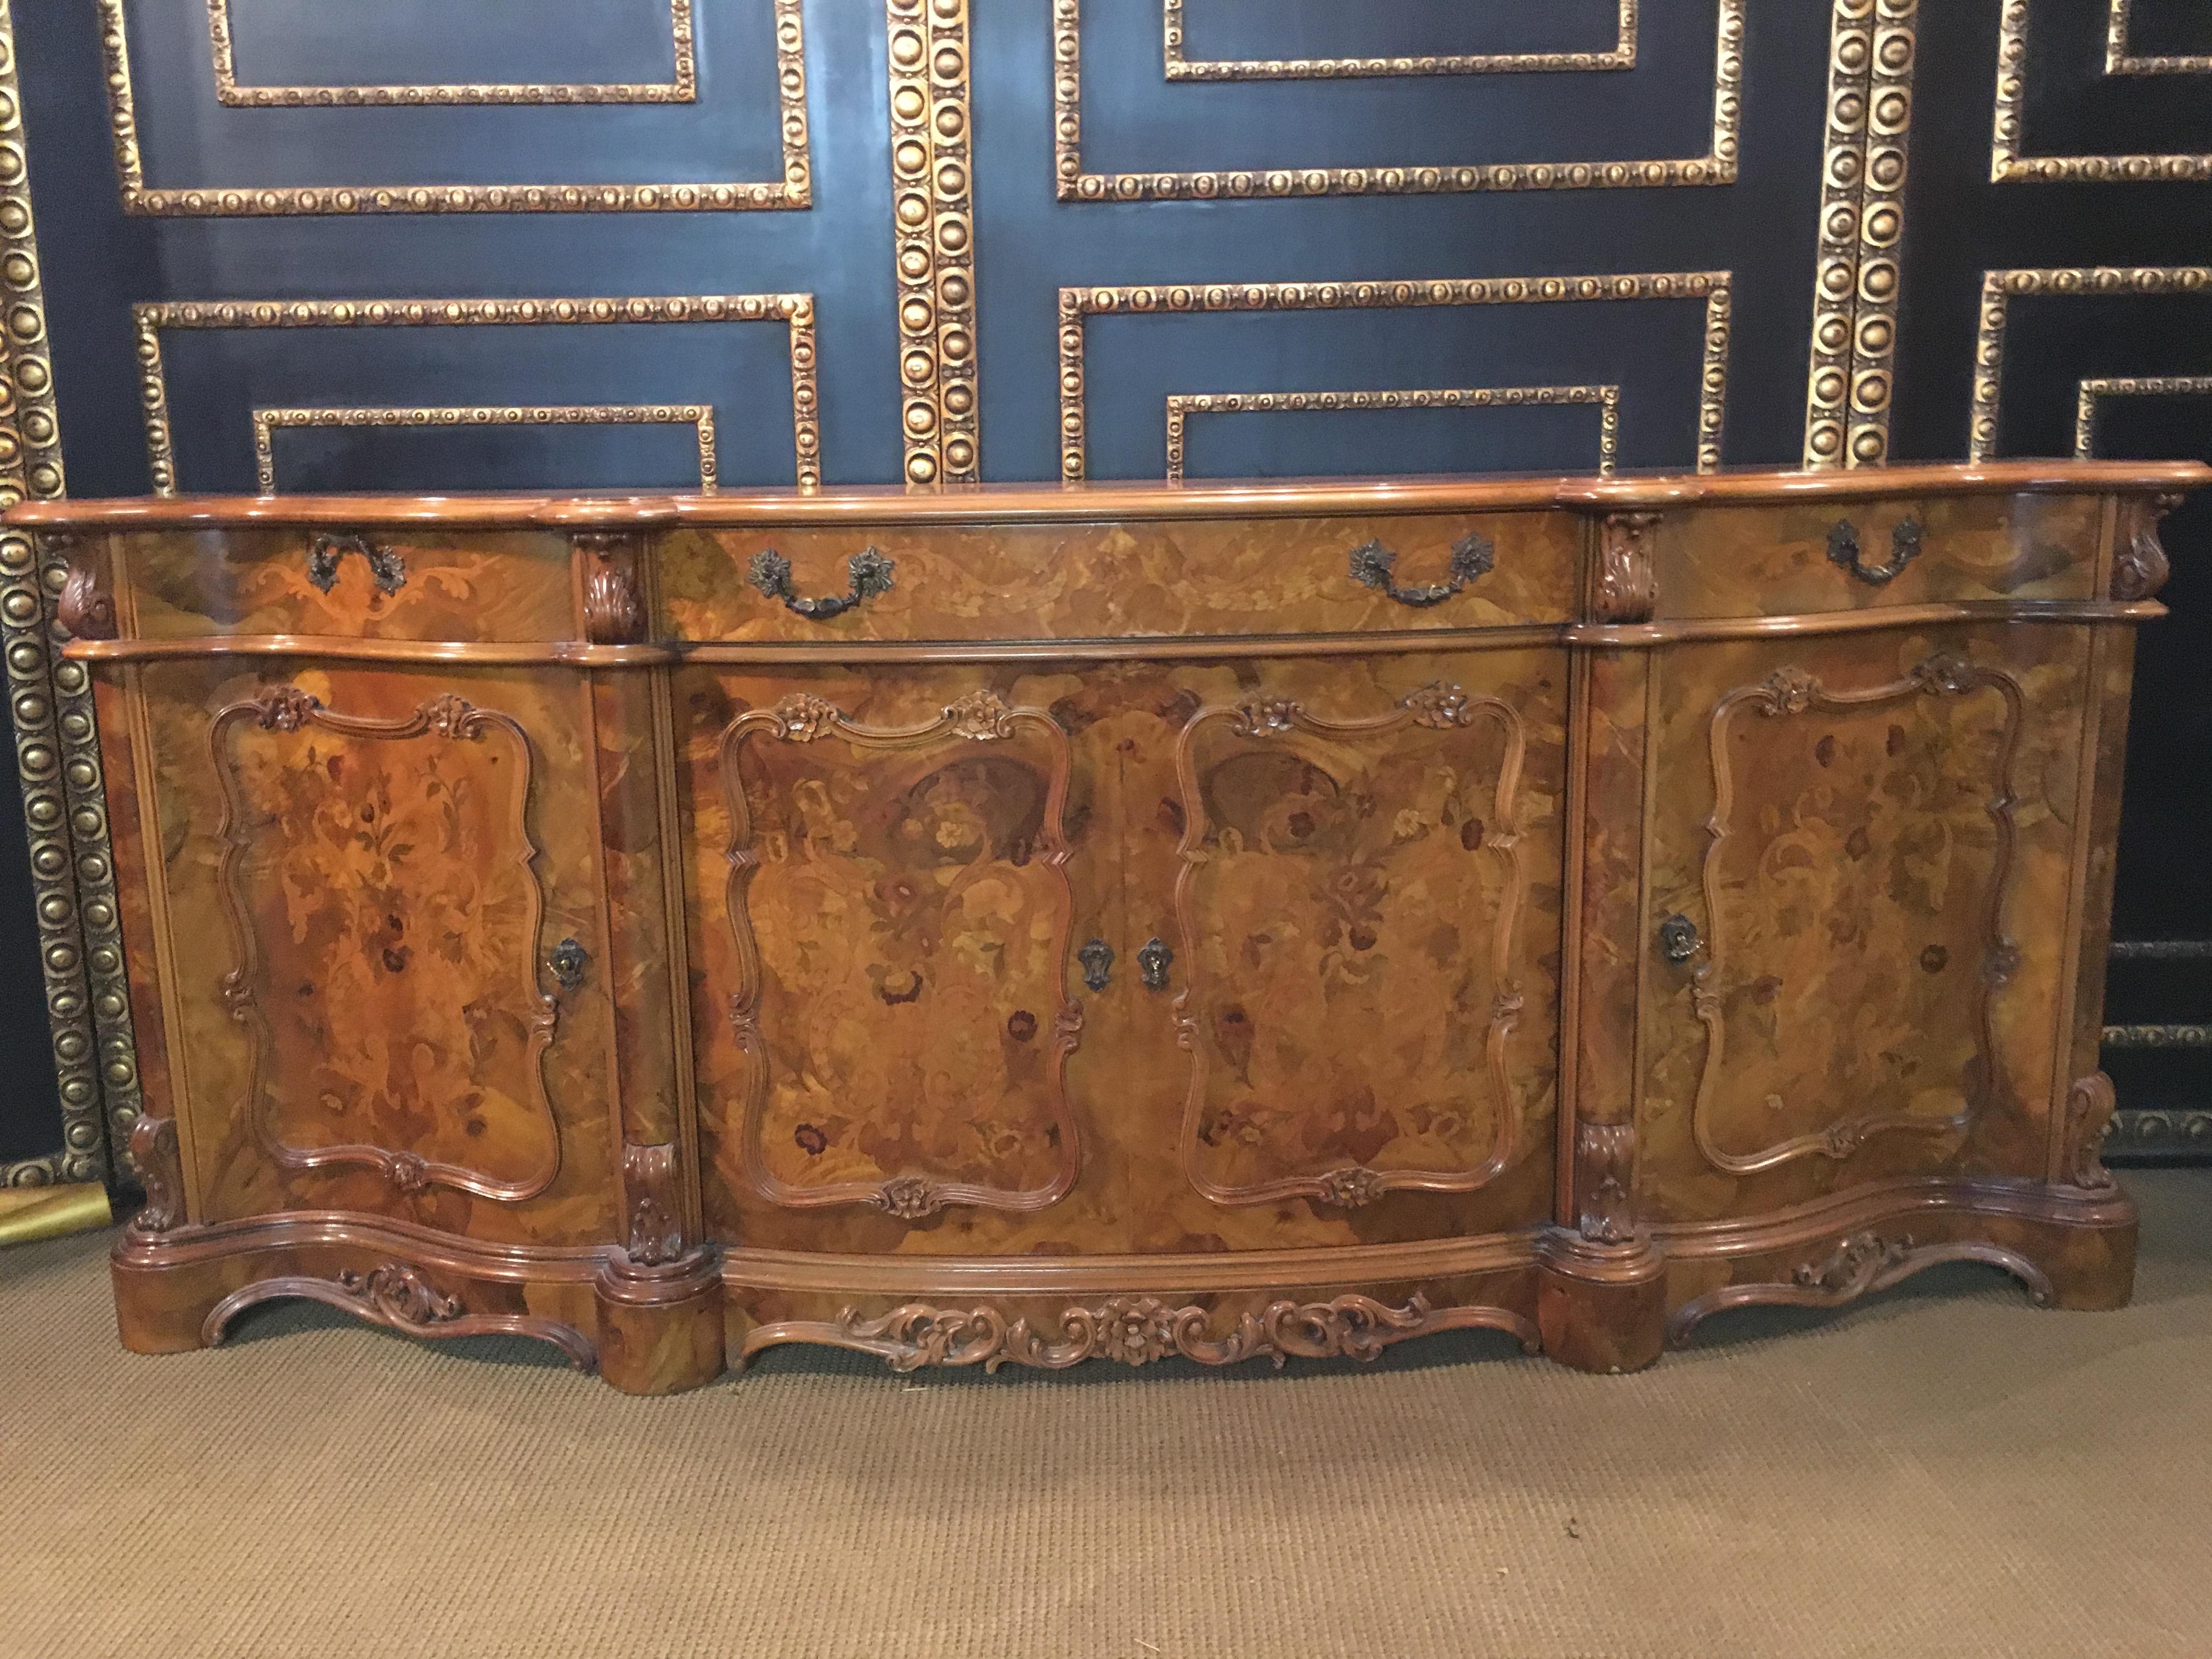 Unique sideboard in the style of the 18th century, in root wood with floral inlays, in absolutely 